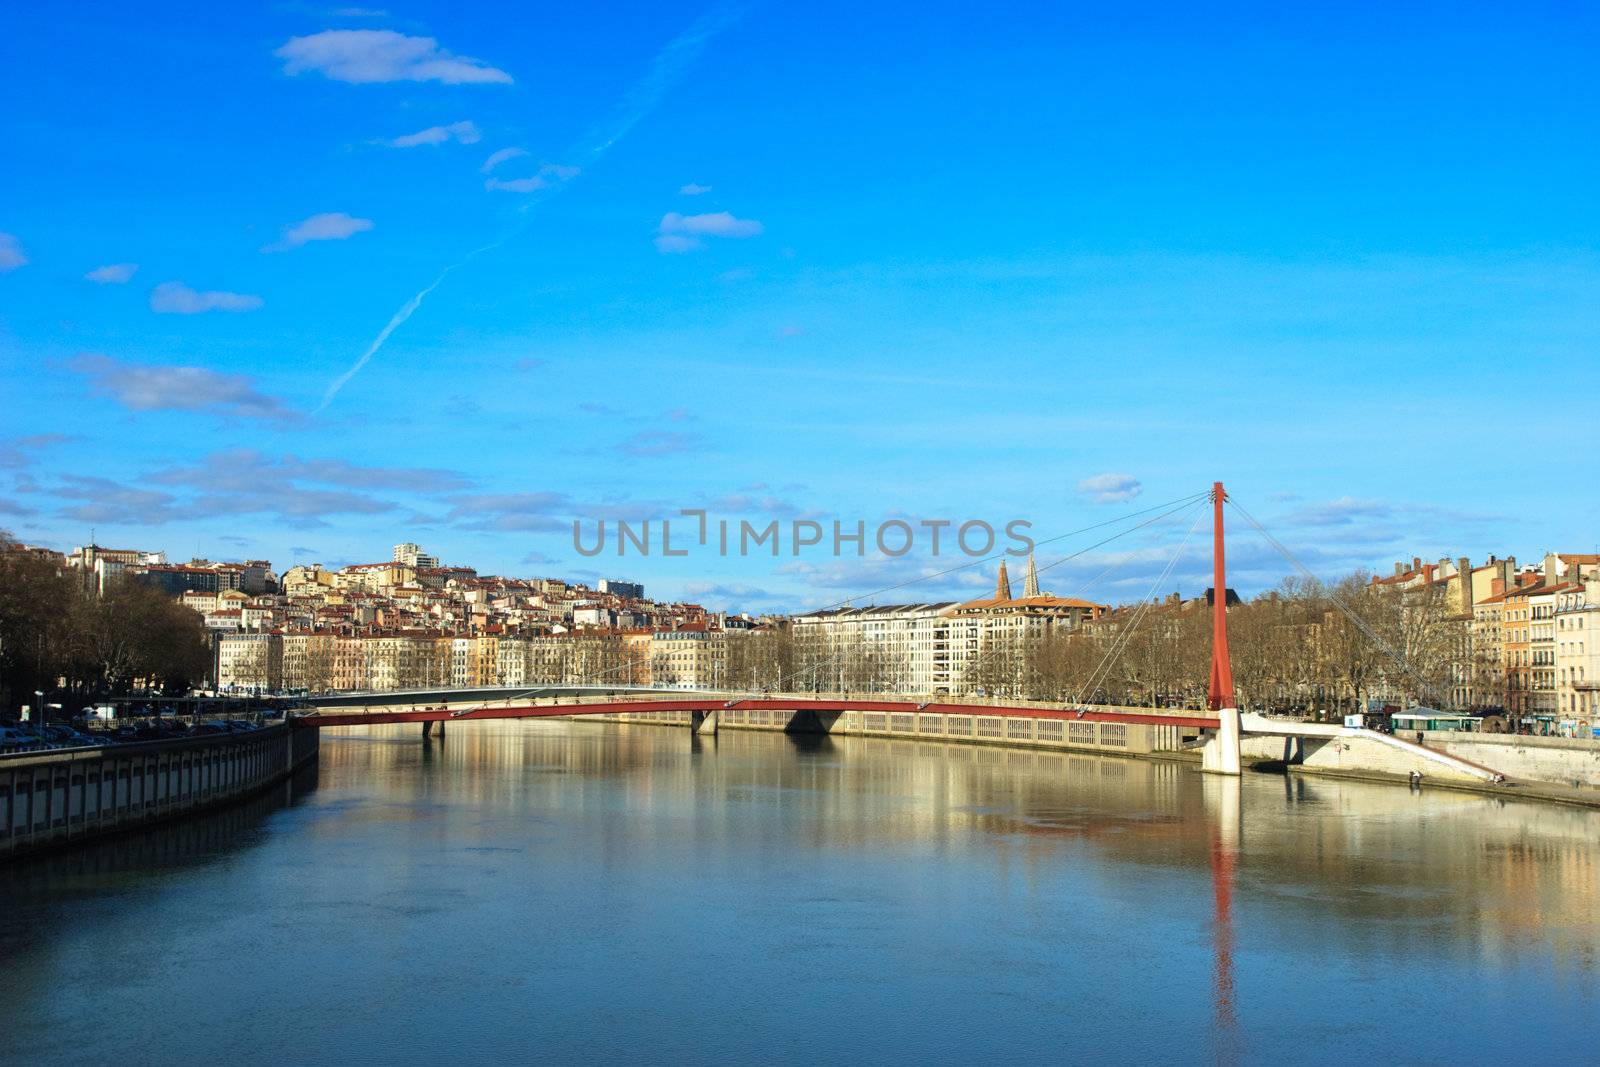 The bank of the Saone river at the city of Lyon in east-central France